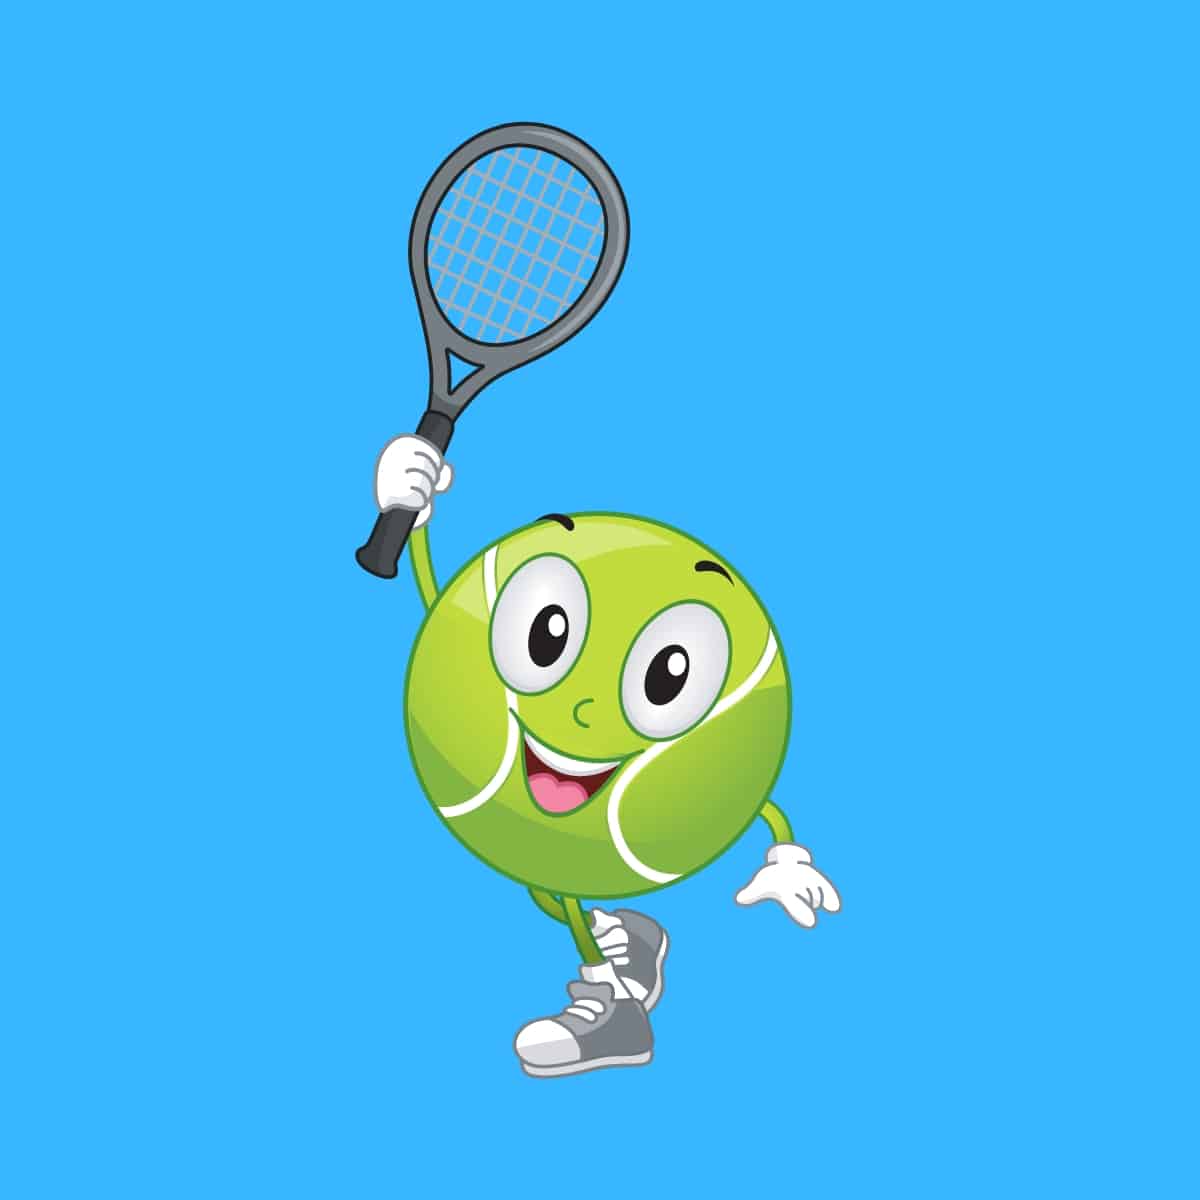 Cartoon graphic of a tennis ball smiling and holding a racquet above its head on blue background.